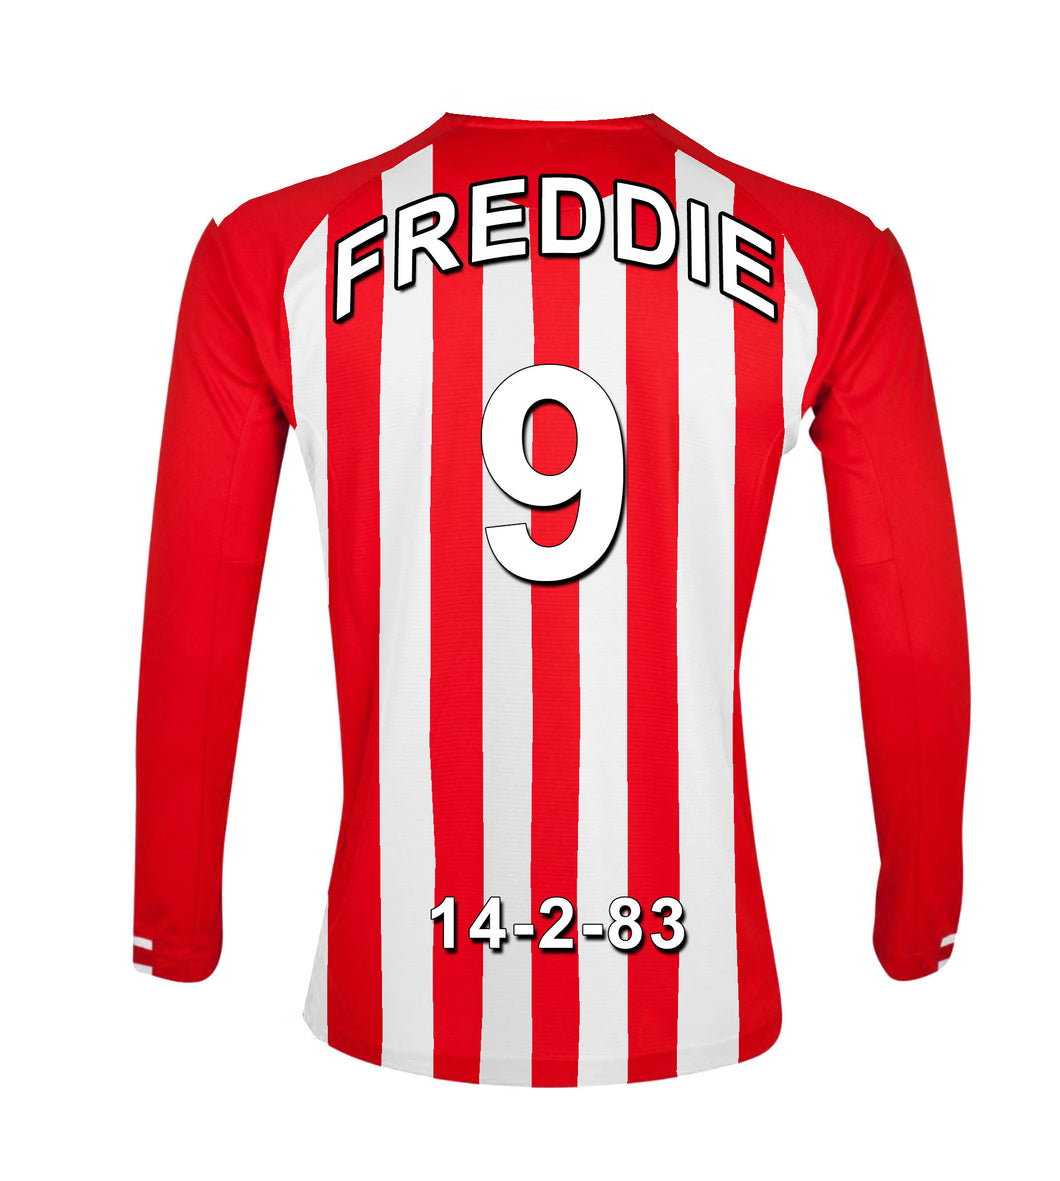 Stoke Football Club red and white personalised football shirt canvas